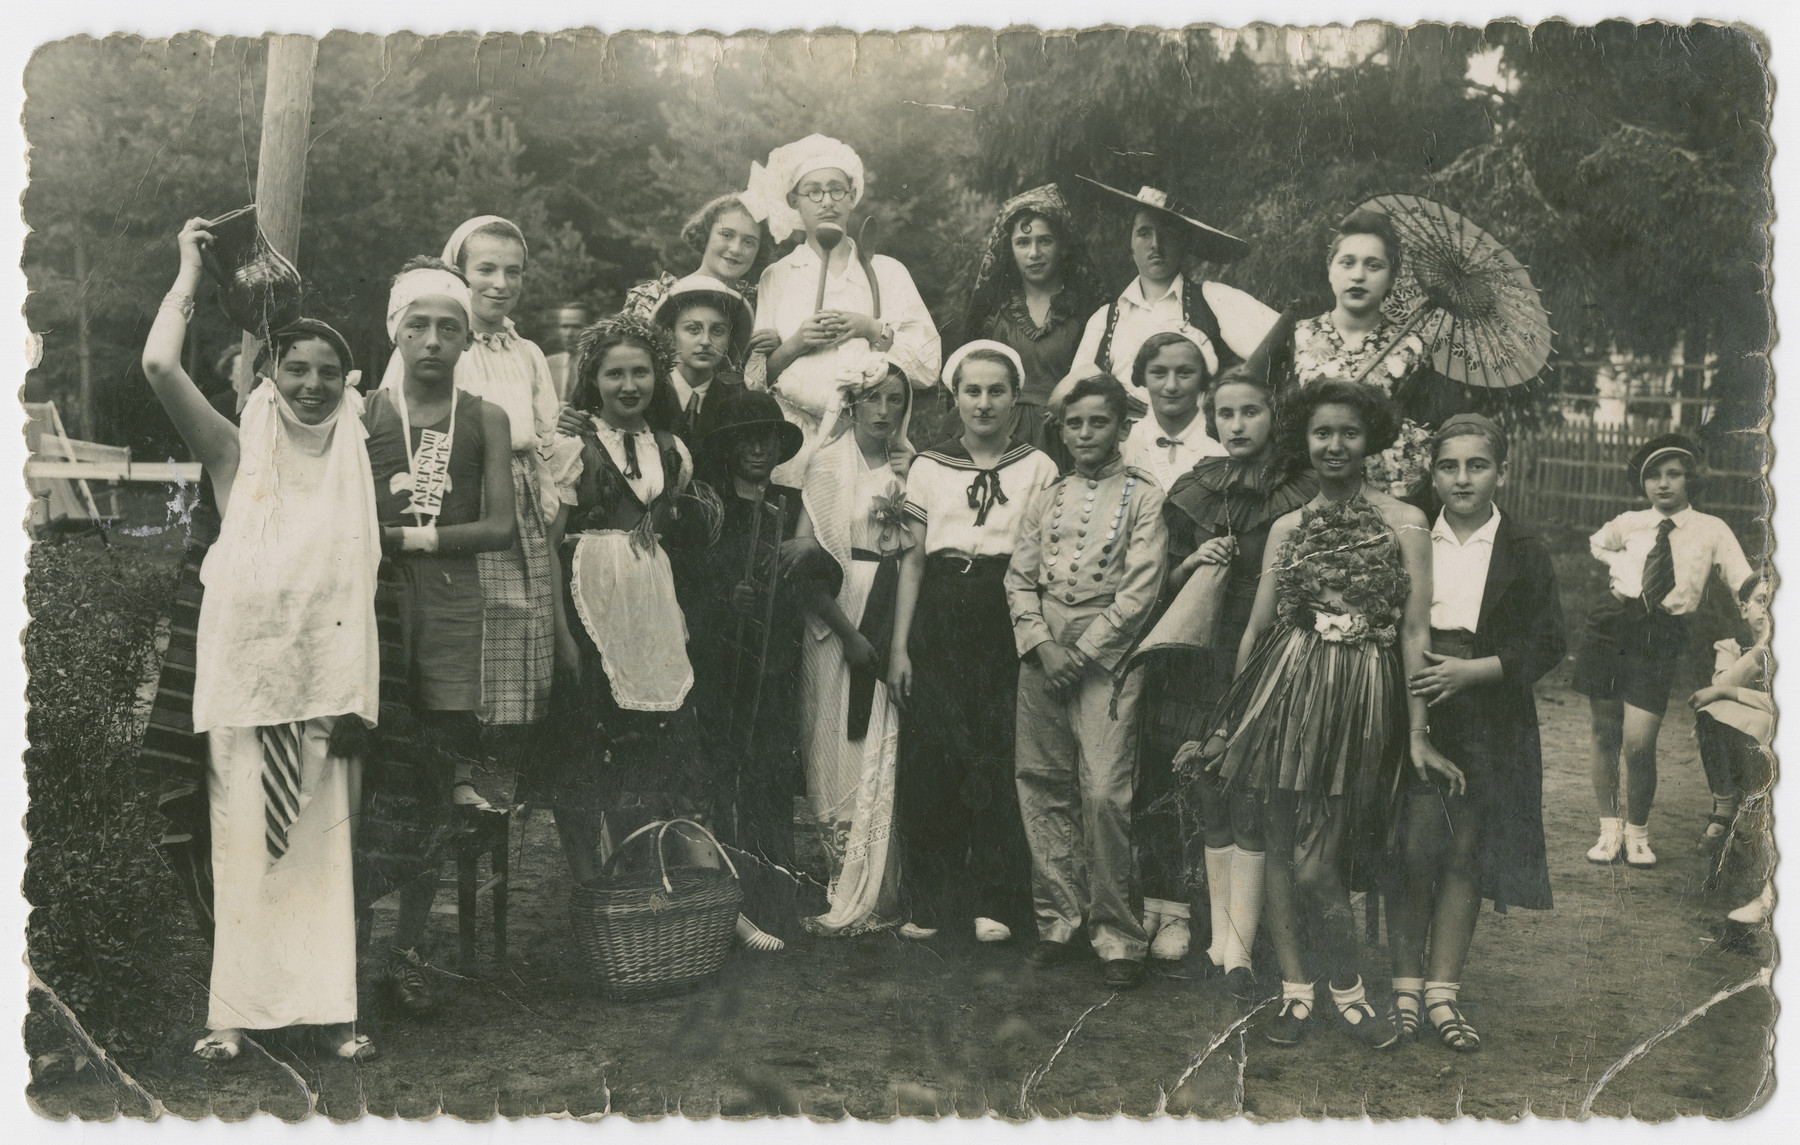 A group of teenagers dressed in [Purim] costumes.